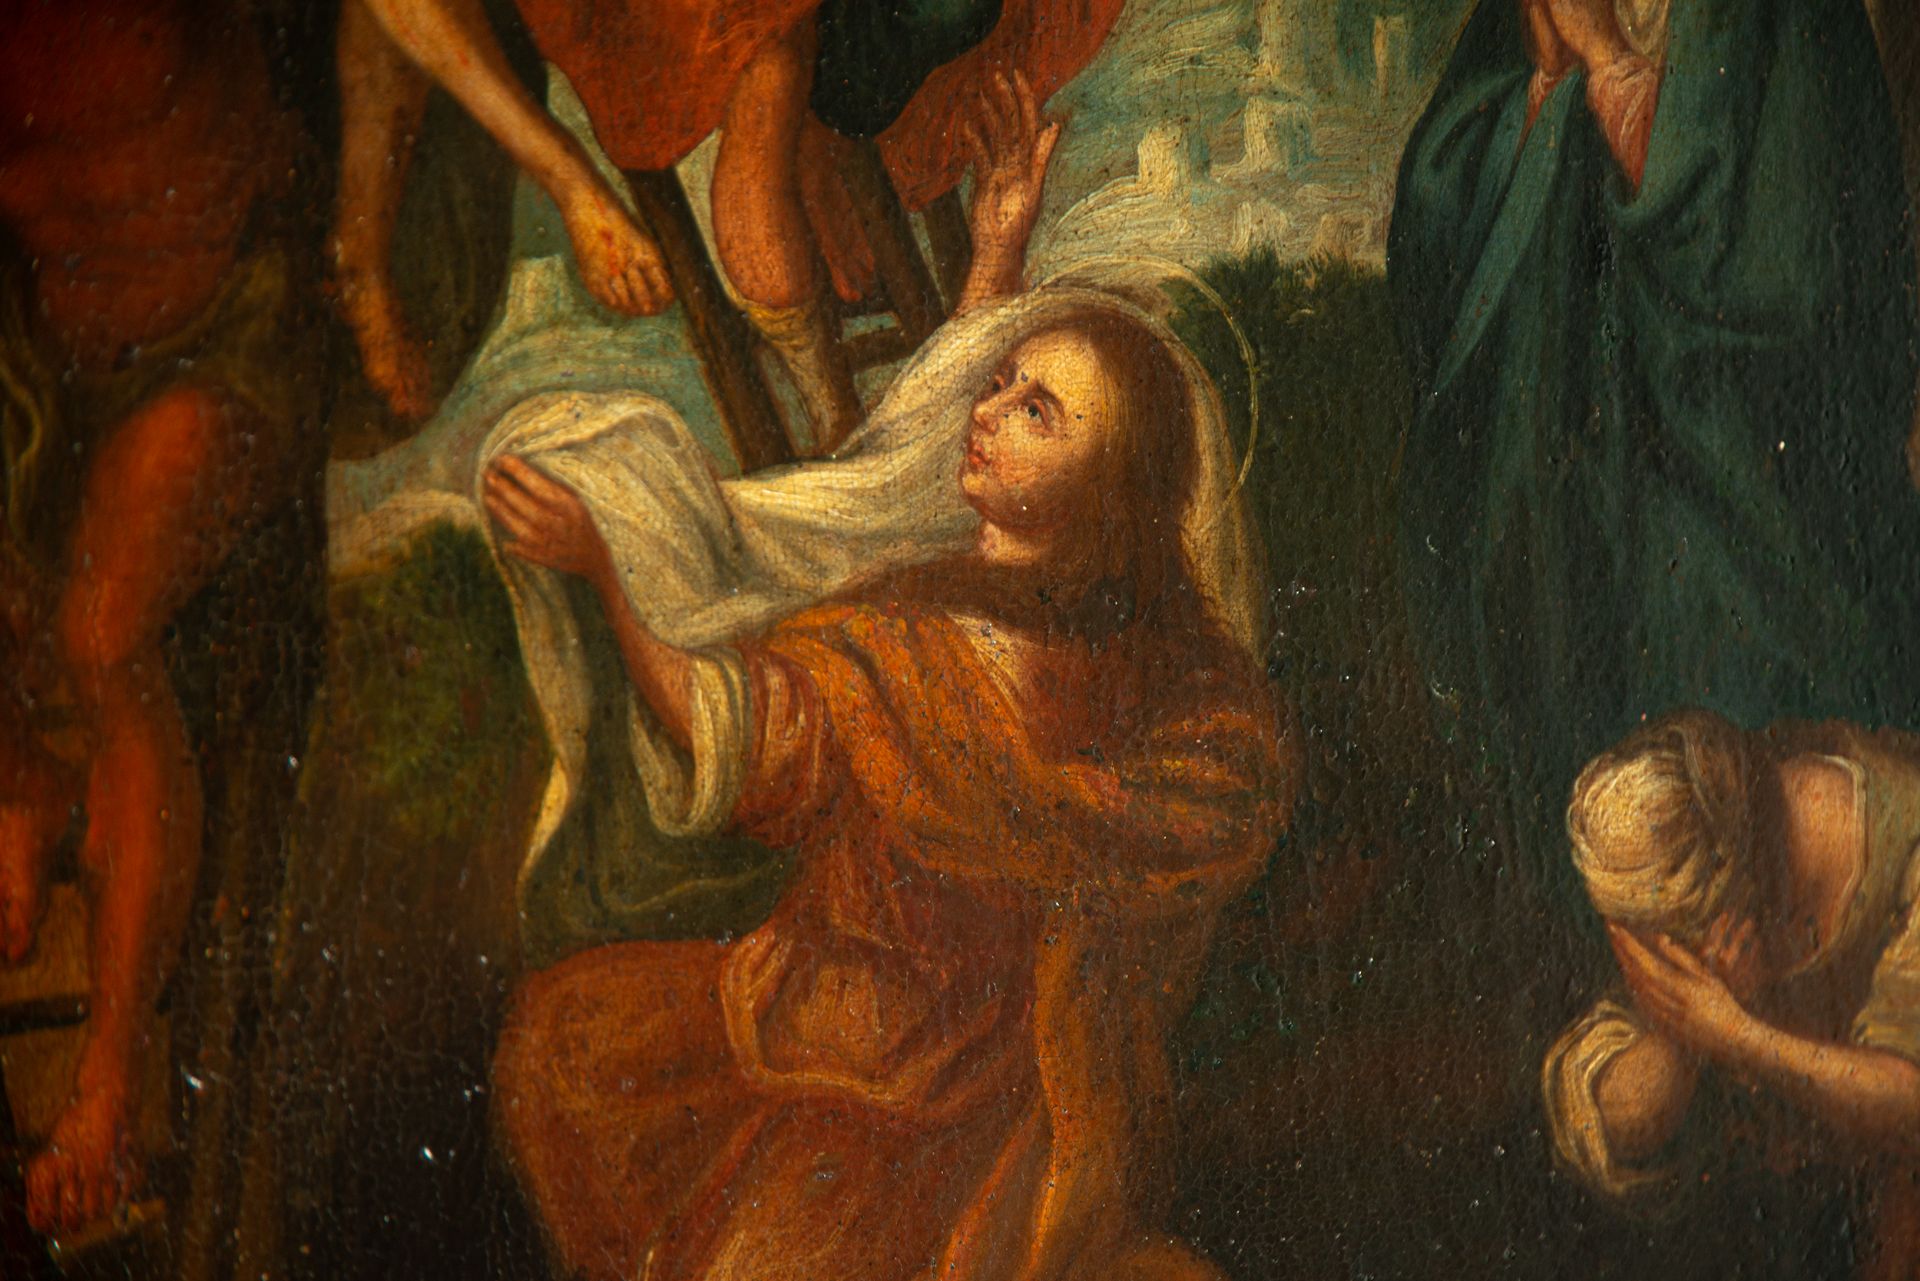 Jesus Descending from the Cross, Spanish school of the 17th century - Image 9 of 11